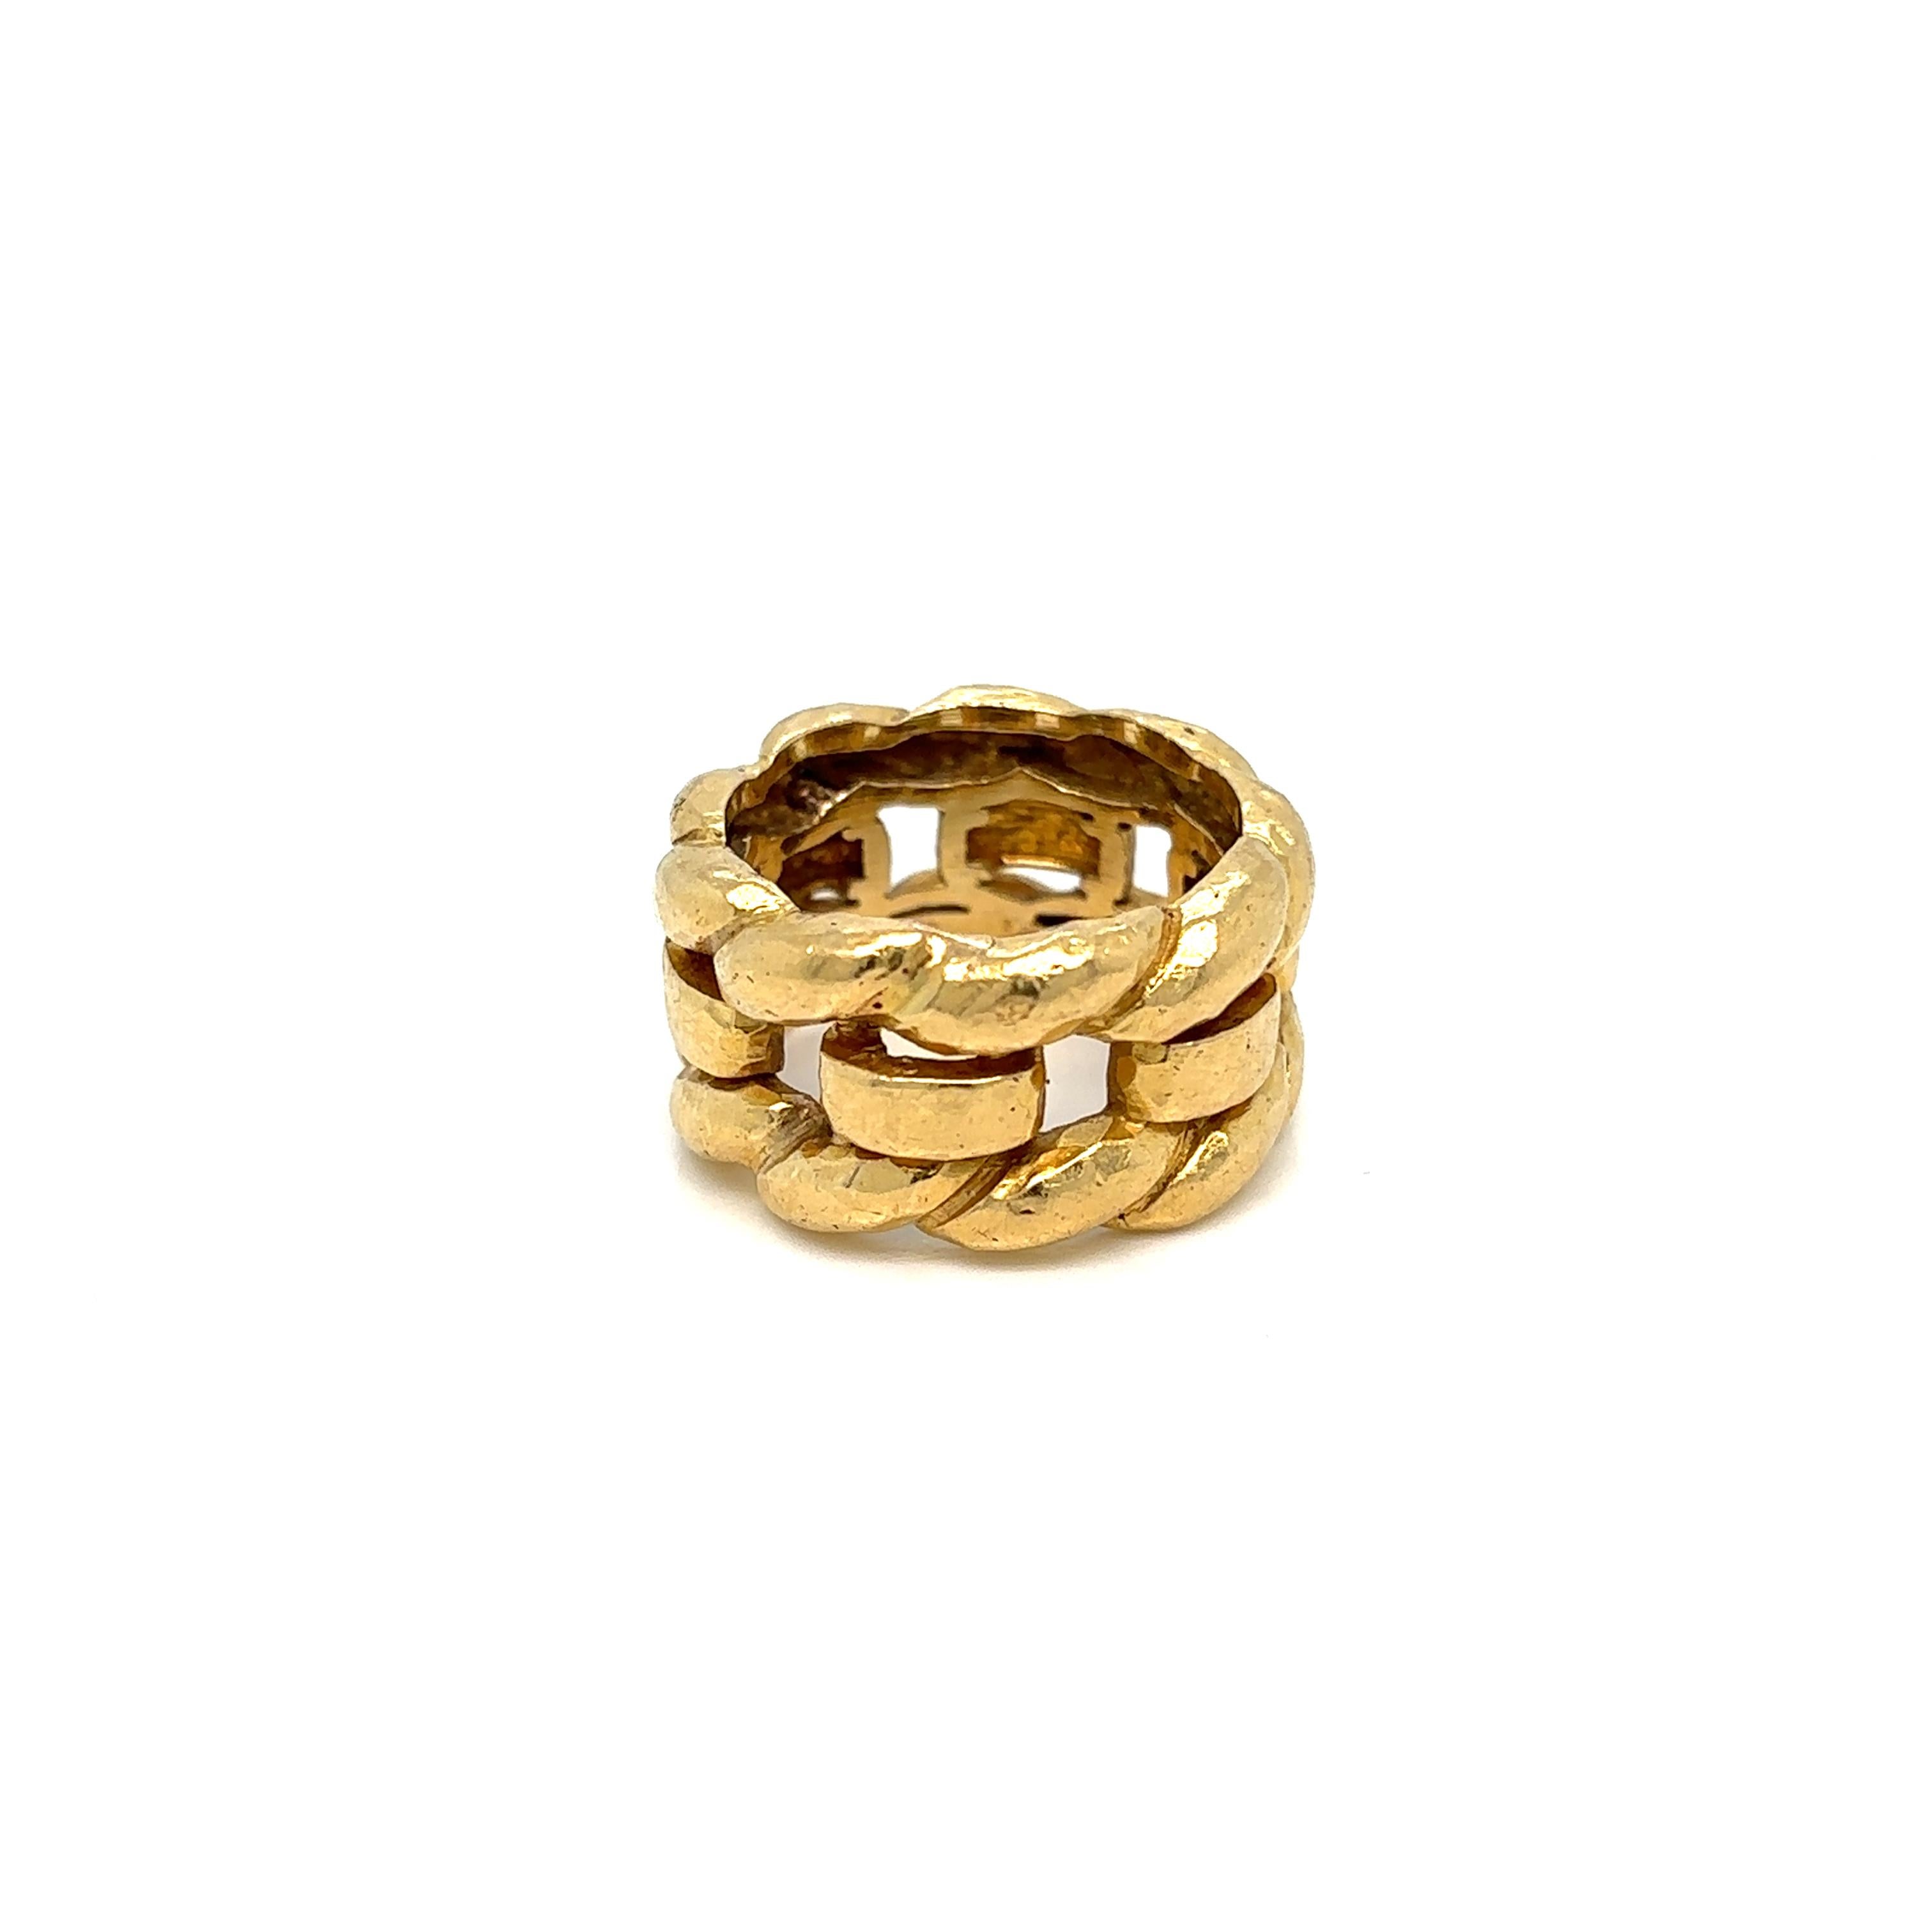 Vintage bold woven gold band by David Webb. The entire ring is made of 18 karat gold. Twisted rope top and bottom flanks rectangular arched links.

Width: 1,2 cm
Size 8. We can put balls gold inside to make it smaller but no possible to increase the